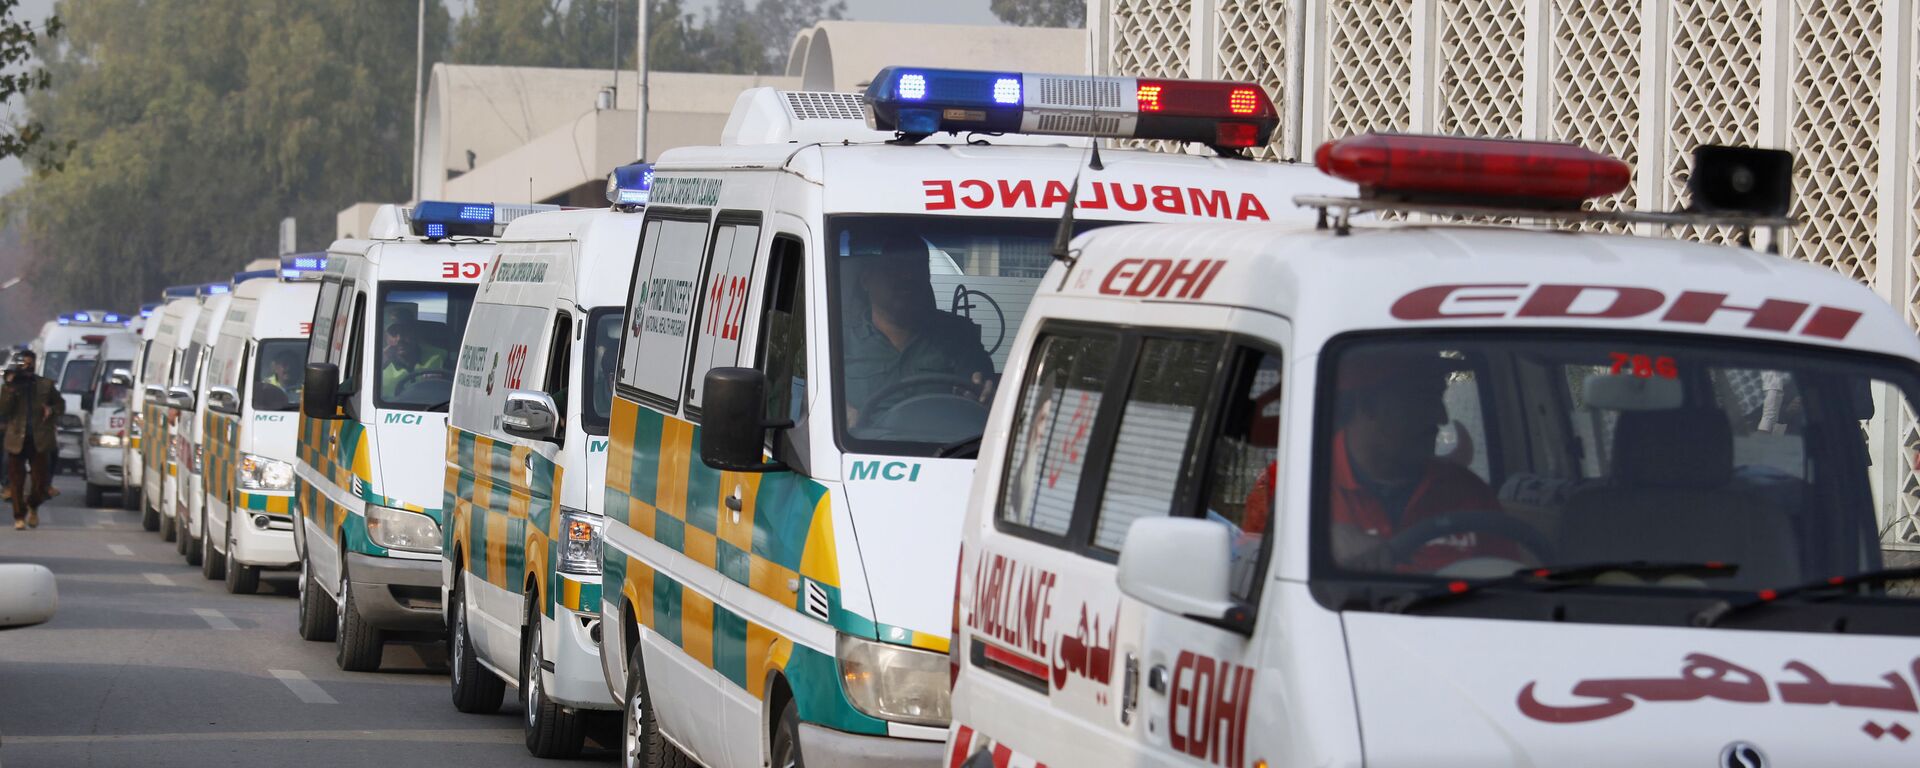 Ambulances queue to unload the bodies of plane crash victims at a local hospital in Islamabad, Pakistan, Thursday, Dec. 8, 2016. Pakistani military helicopters ferried remains of plane crash victims to the capital, Islamabad, as aviation authorities said they opened a probe into the crash that killed 47 passengers and crew the day before in the country's northwest. (AP Photo/Anjum Naveed) - 俄羅斯衛星通訊社, 1920, 20.08.2021